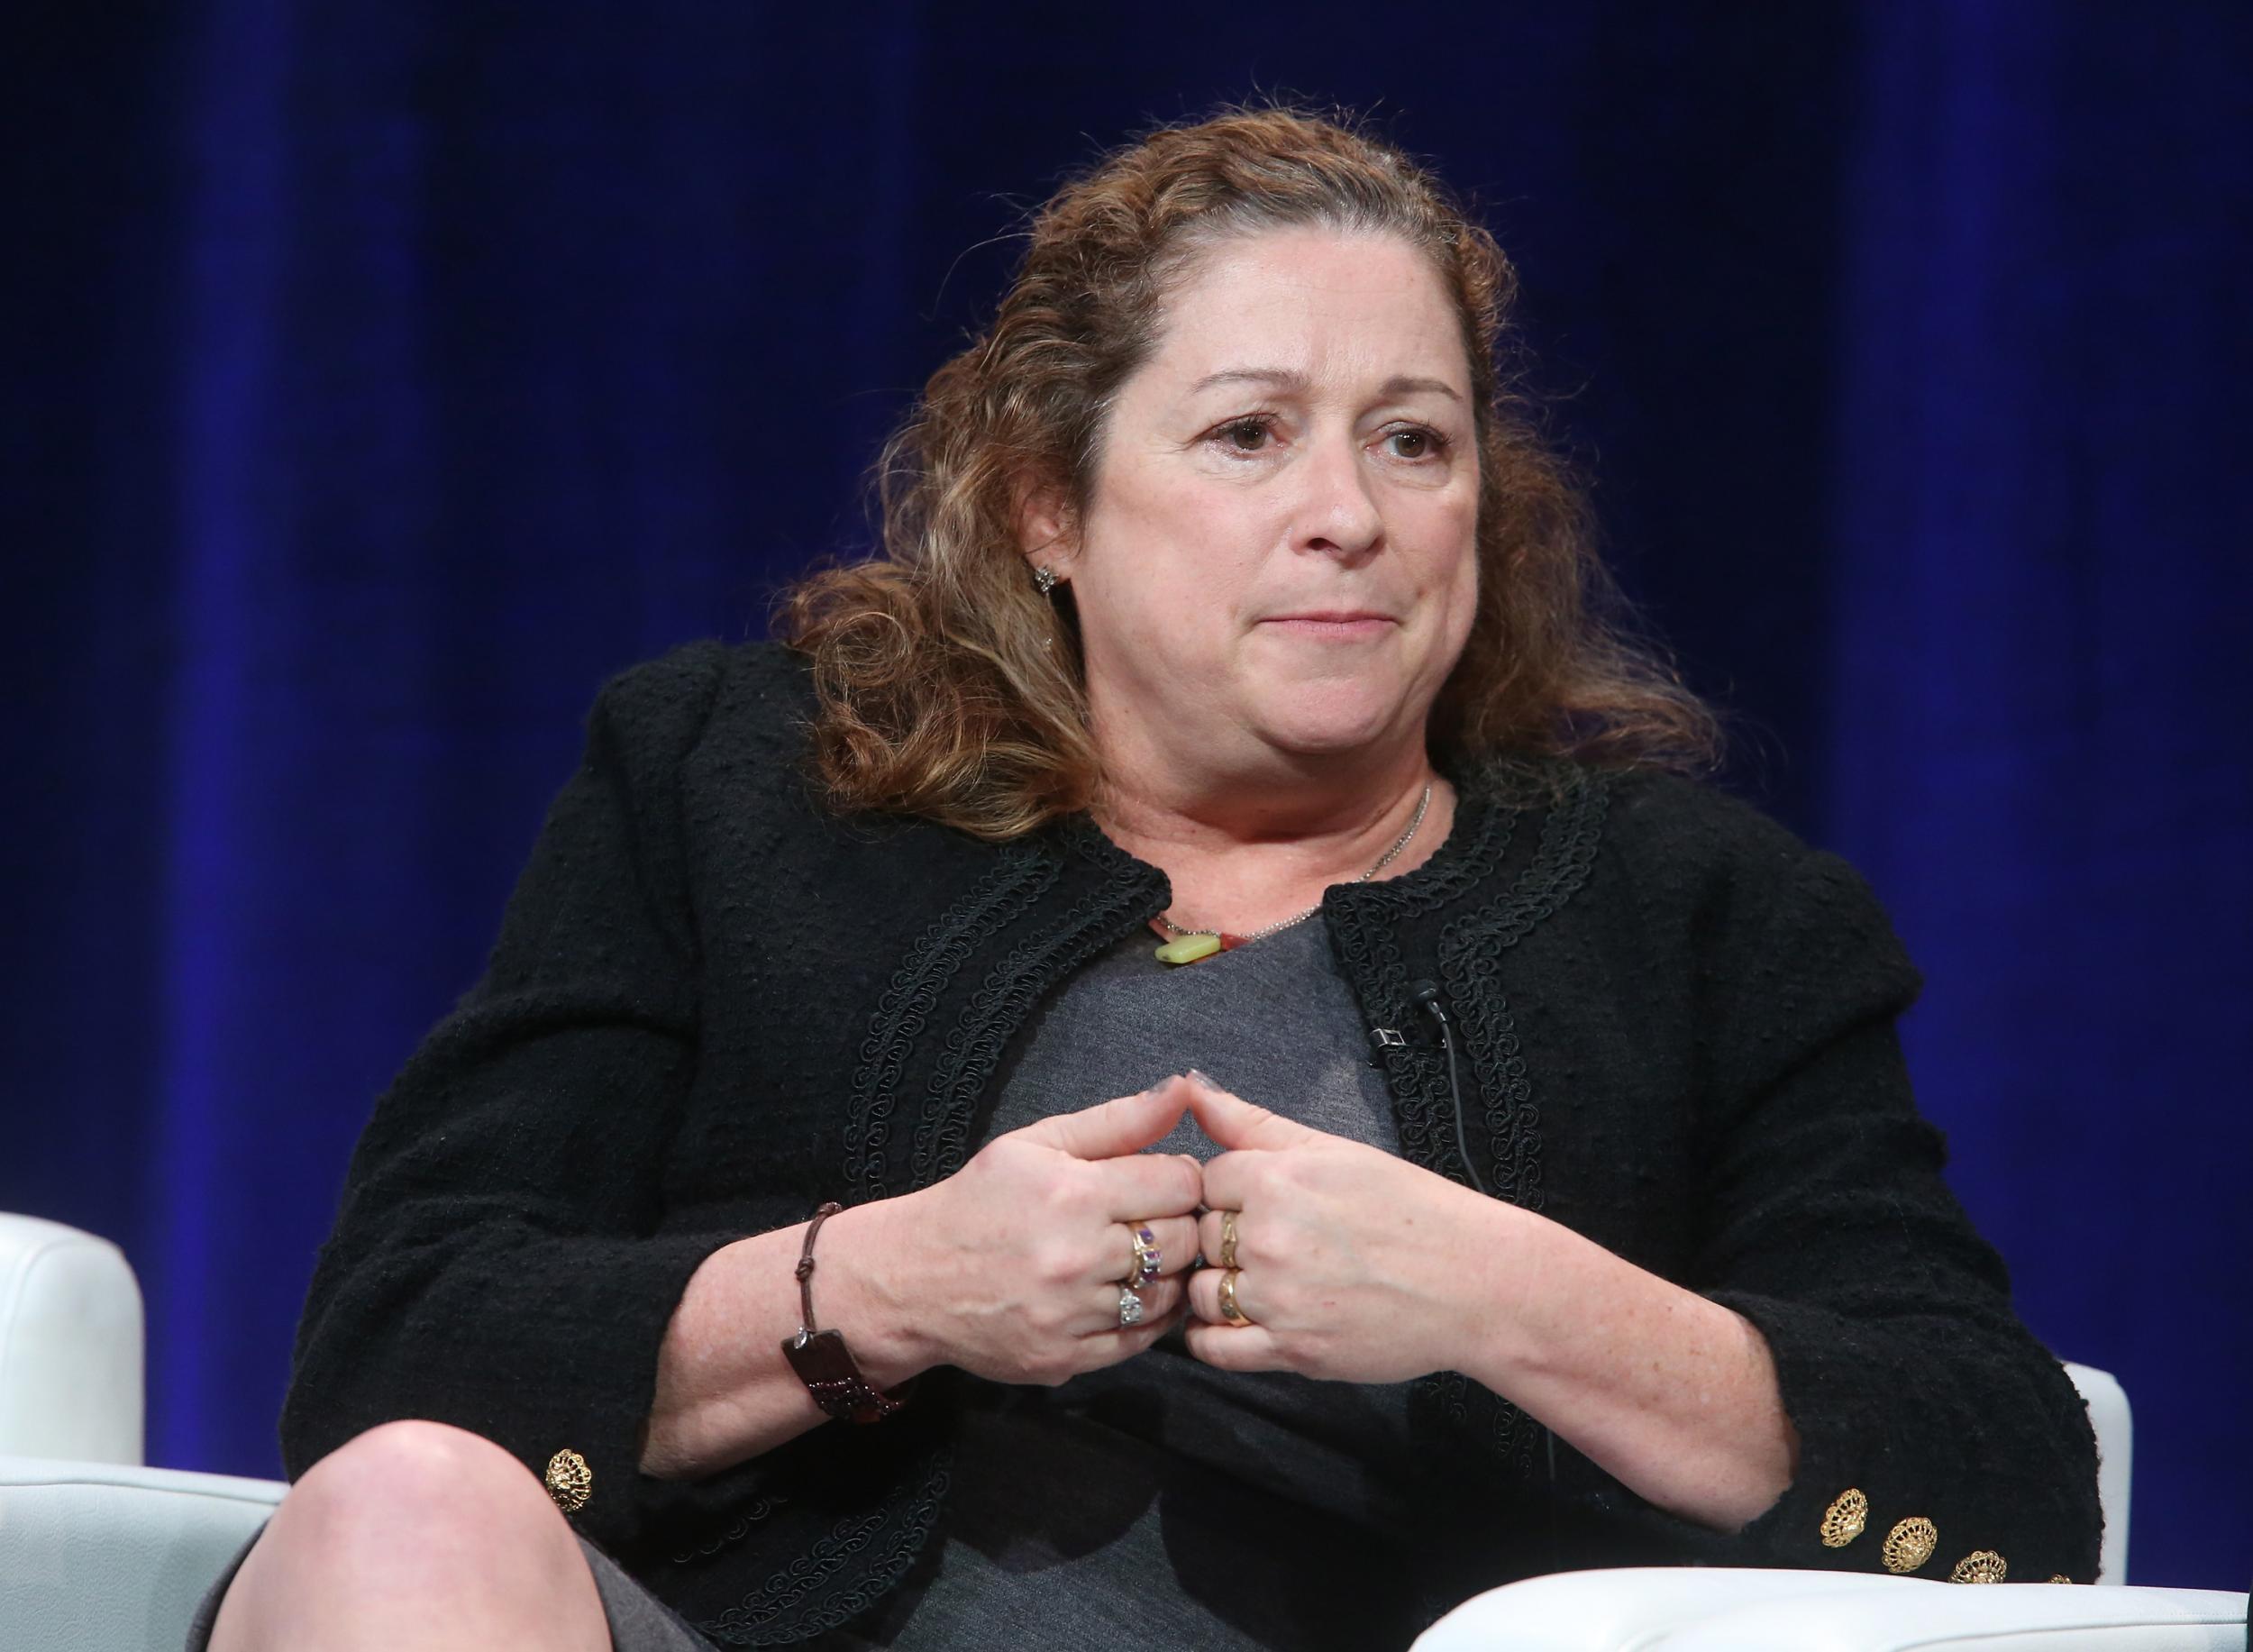 Abigail Disney, granddaughter of The Walt Disney Company co-founder Roy O Disney, is one of 102 super-rich signers of the open letter